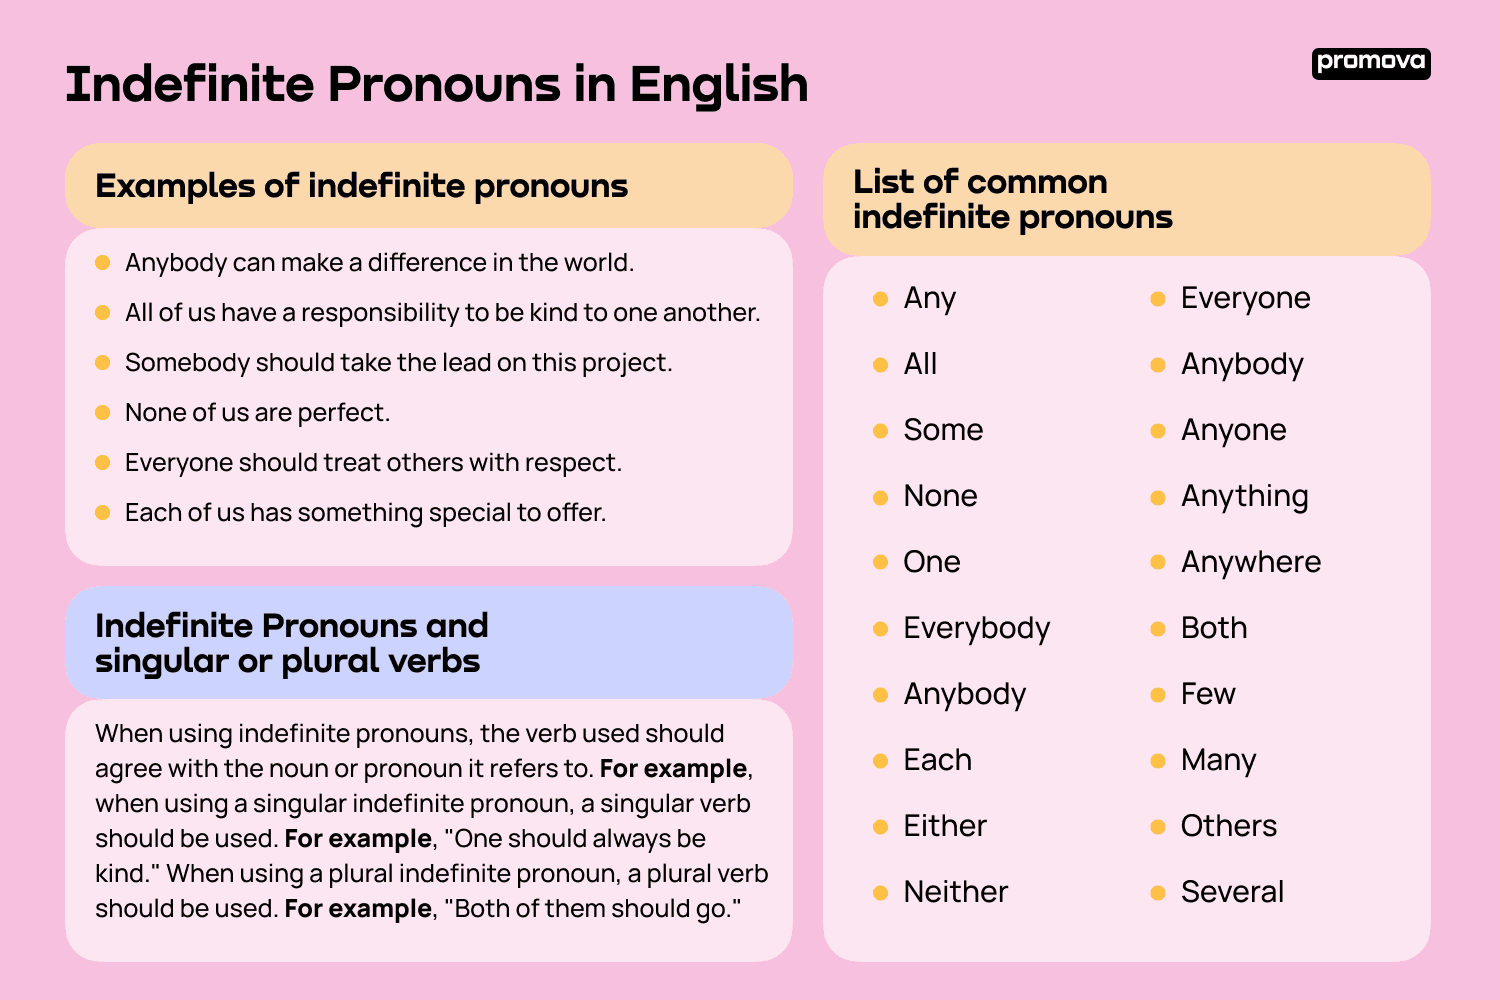 Examples of indefinite pronouns